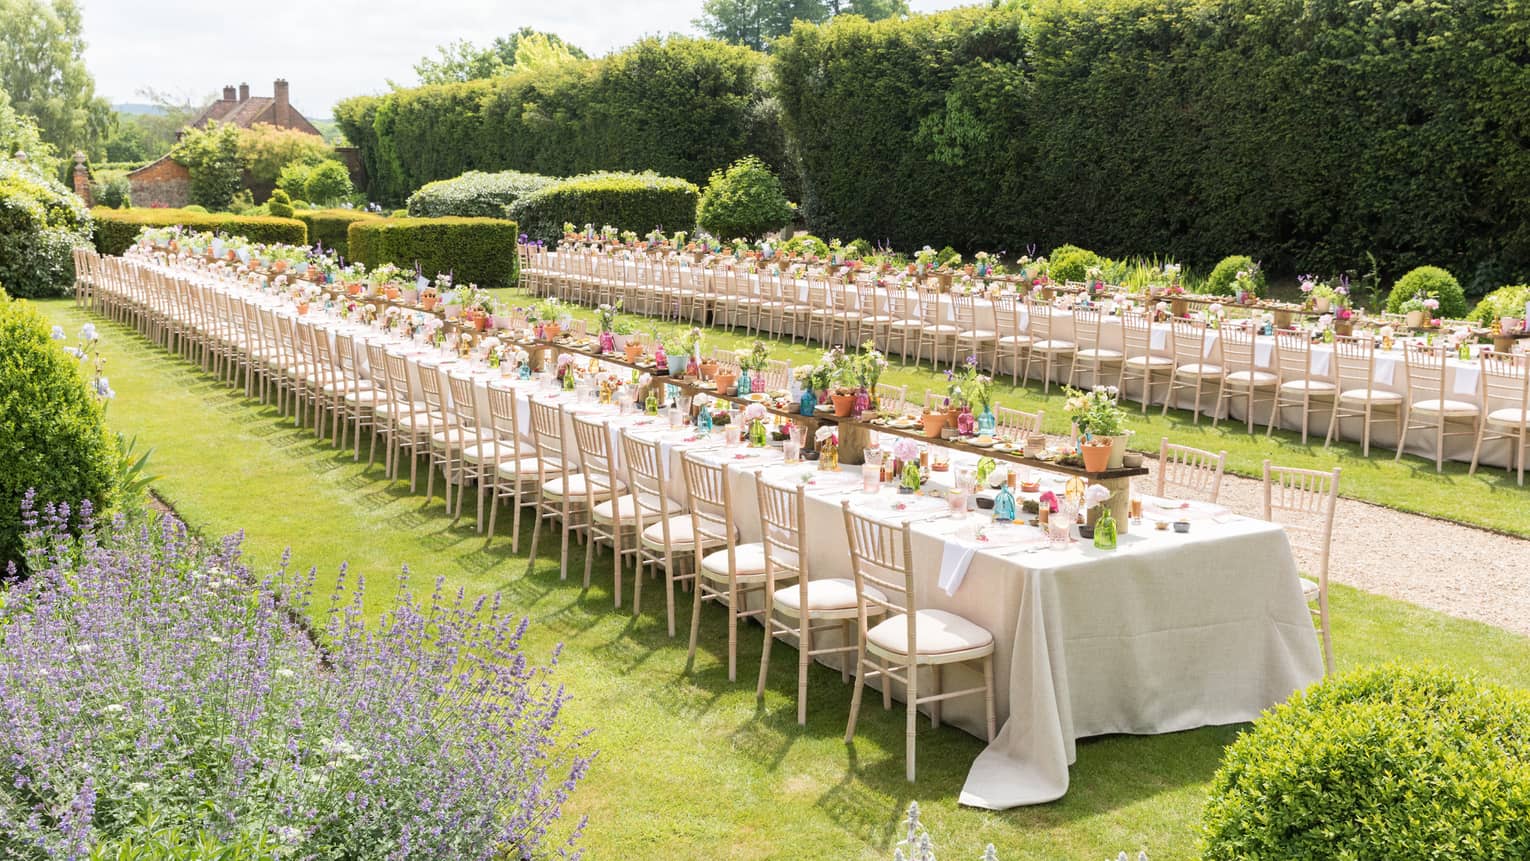 An outdoor reception in a garden, with very long rectangular tables set with flowers, plates and silverware